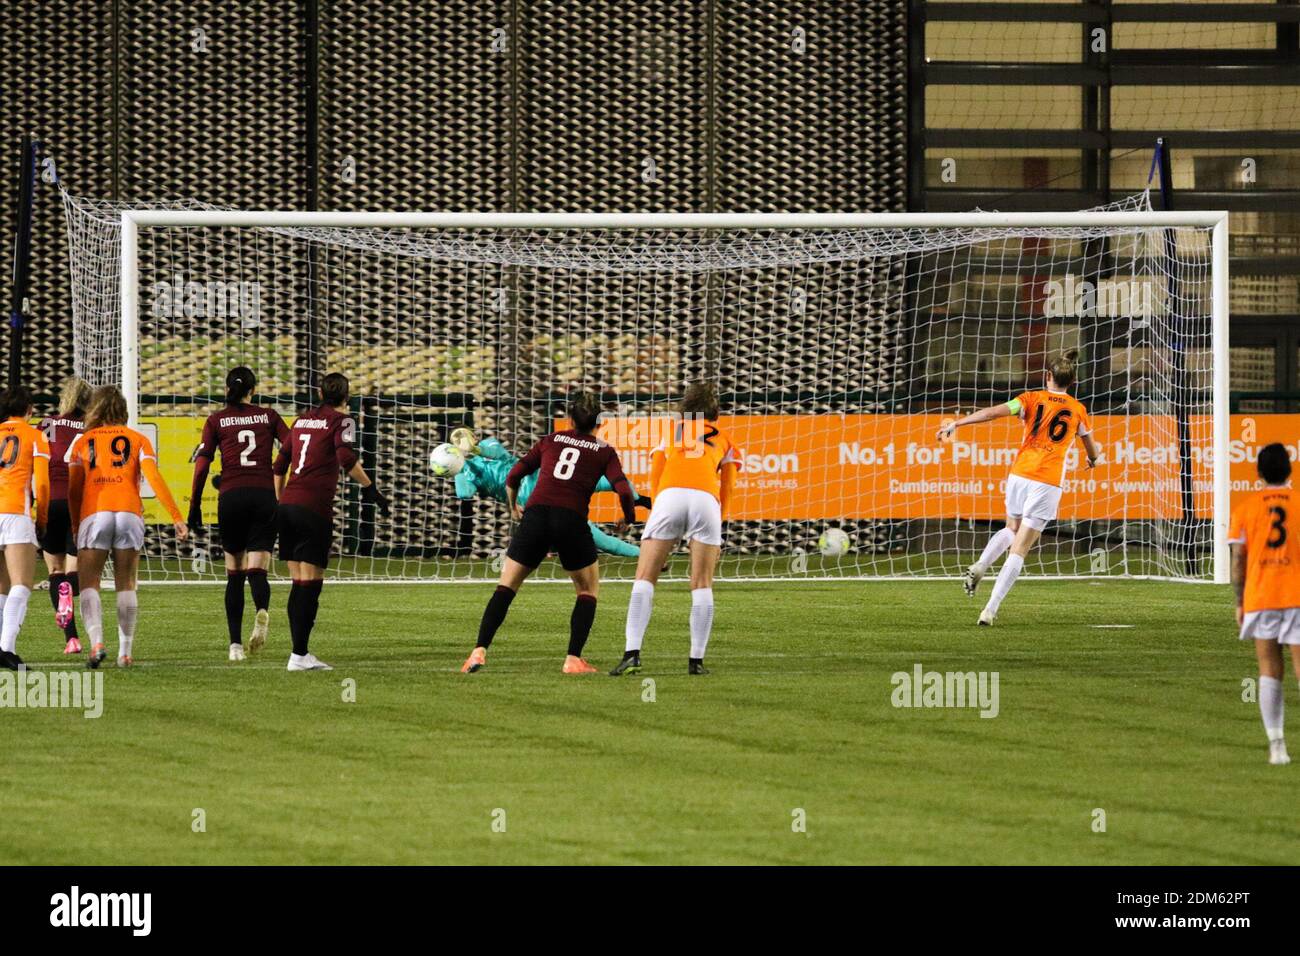 Glasgow, UK. 16th Dec, 2020. Leanne Ross (#16 Glasgow City) misses a penalty during the UEFA Women's Champions League game between Glasgow City and Sparta Prague at Broadwood Stadium in Glasgow Credit: SPP Sport Press Photo. /Alamy Live News Stock Photo